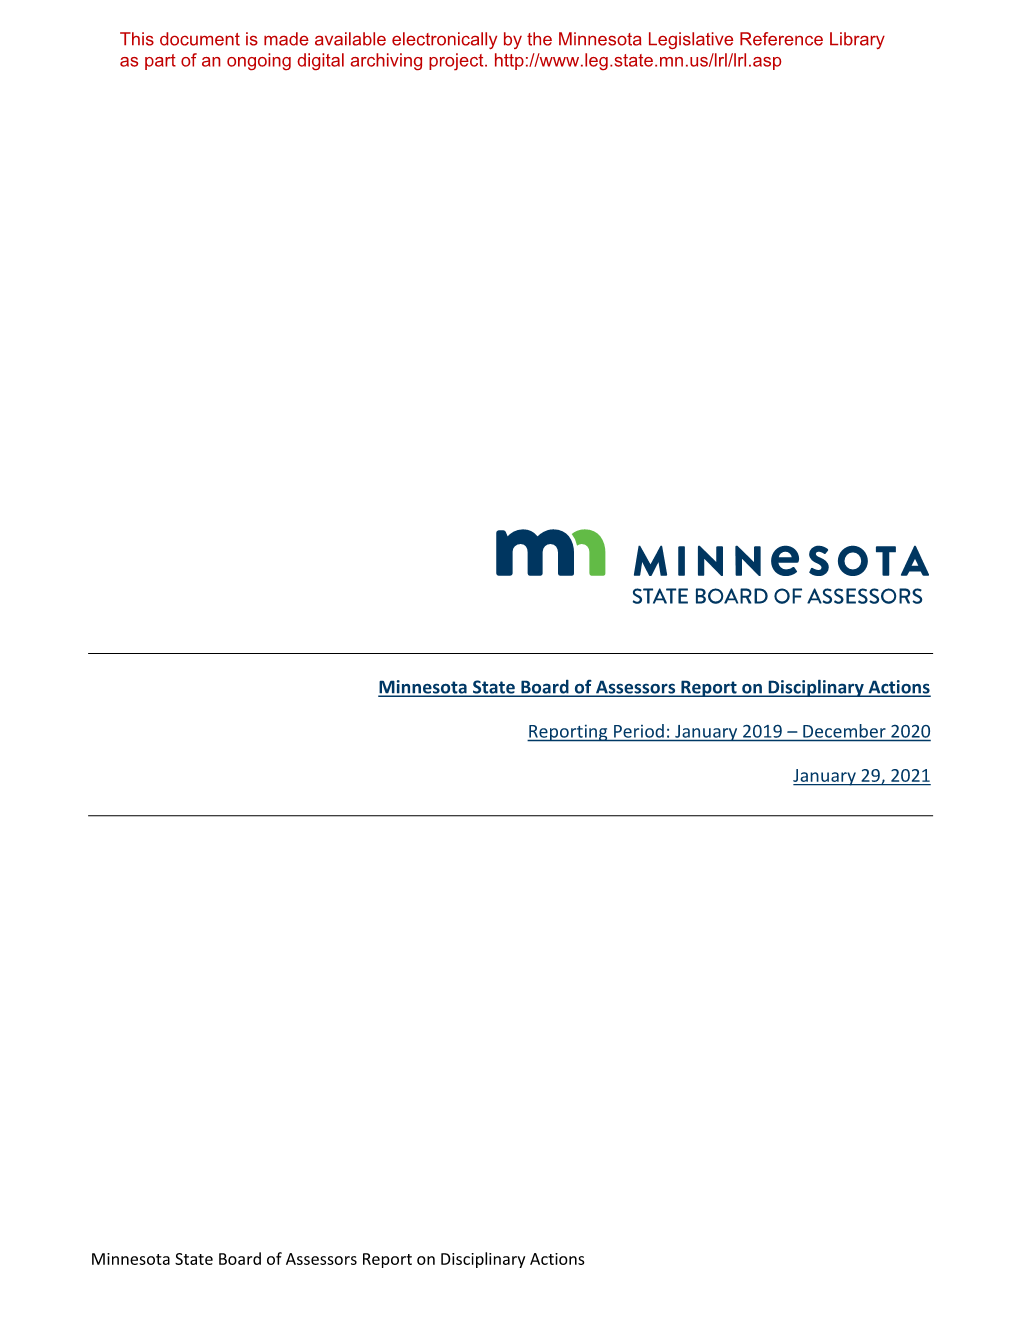 Minnesota State Board of Assessors Report on Disciplinary Actions